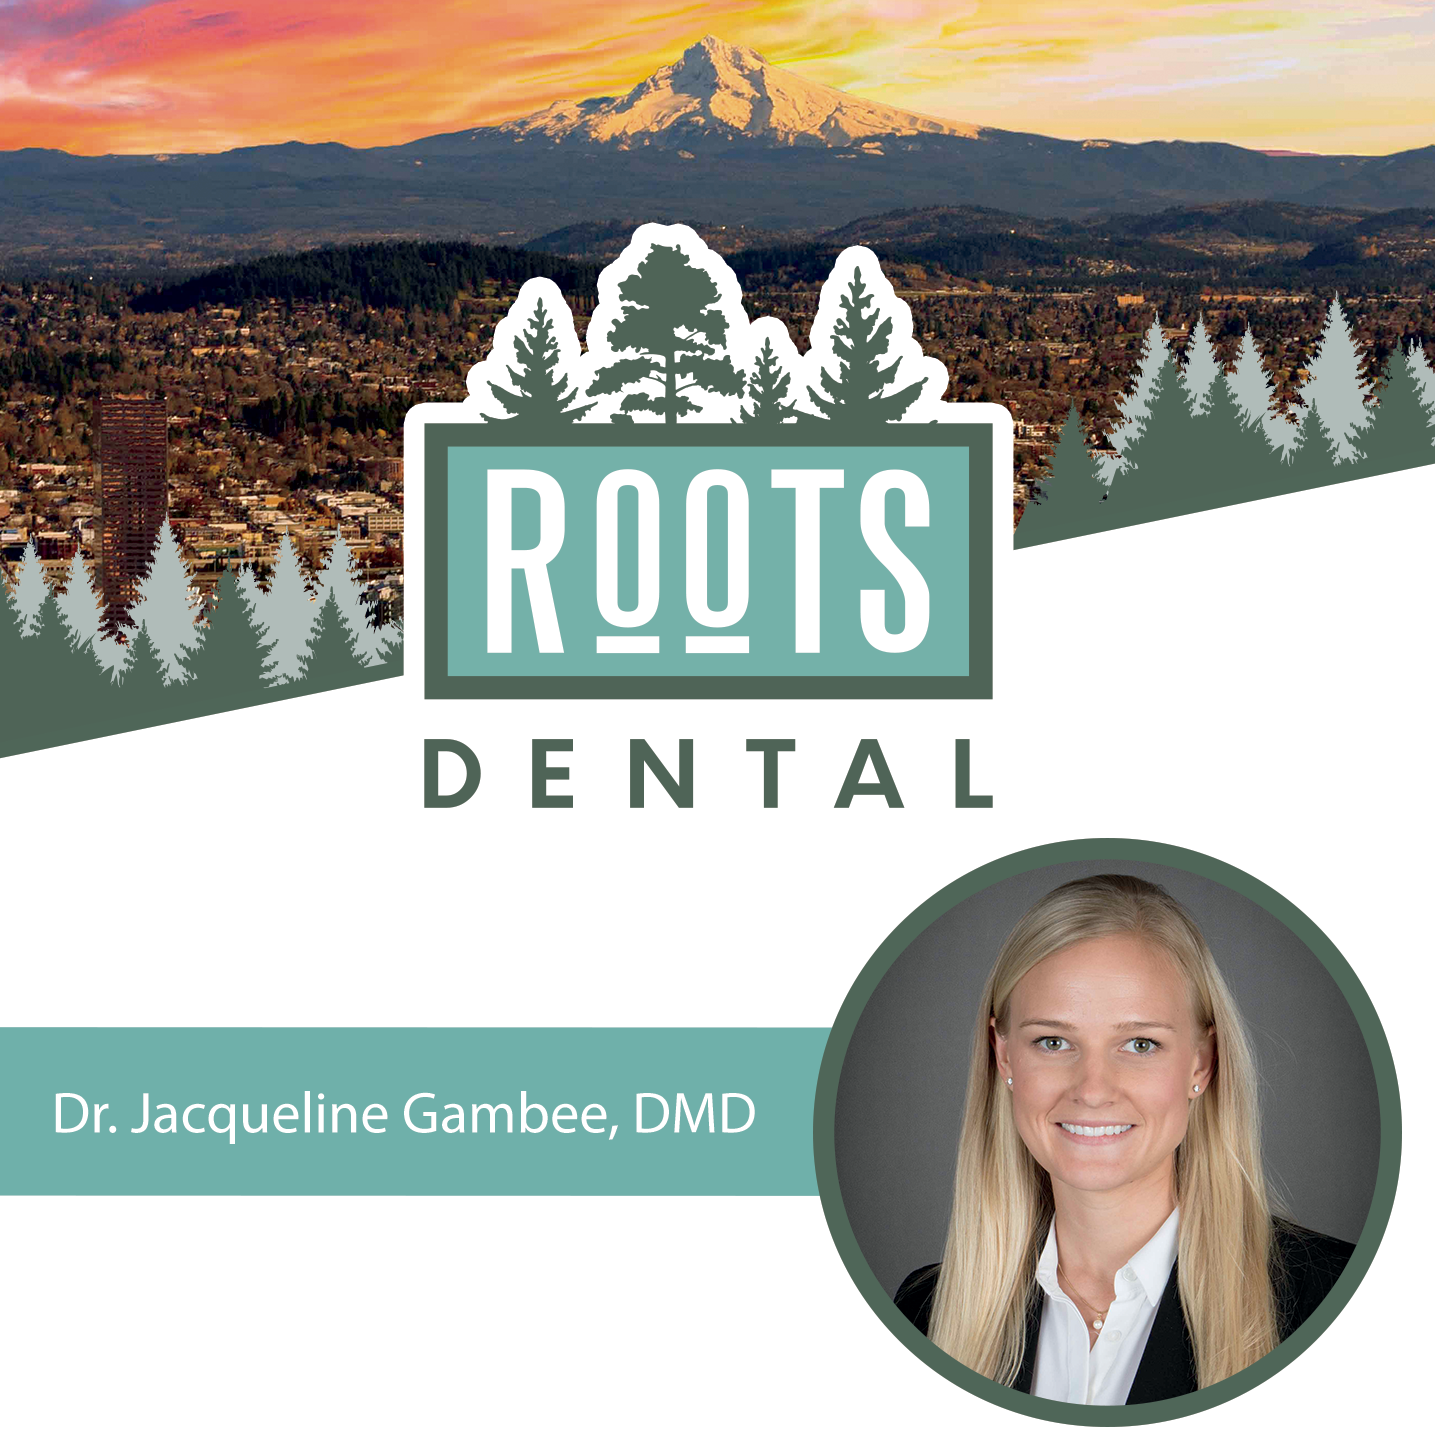 “I’m incredibly excited to bring quality, affordable dental care to Southeast Portland. Serving our communities dental needs is extremely important to my staff and I. We can’t wait to meet you!”